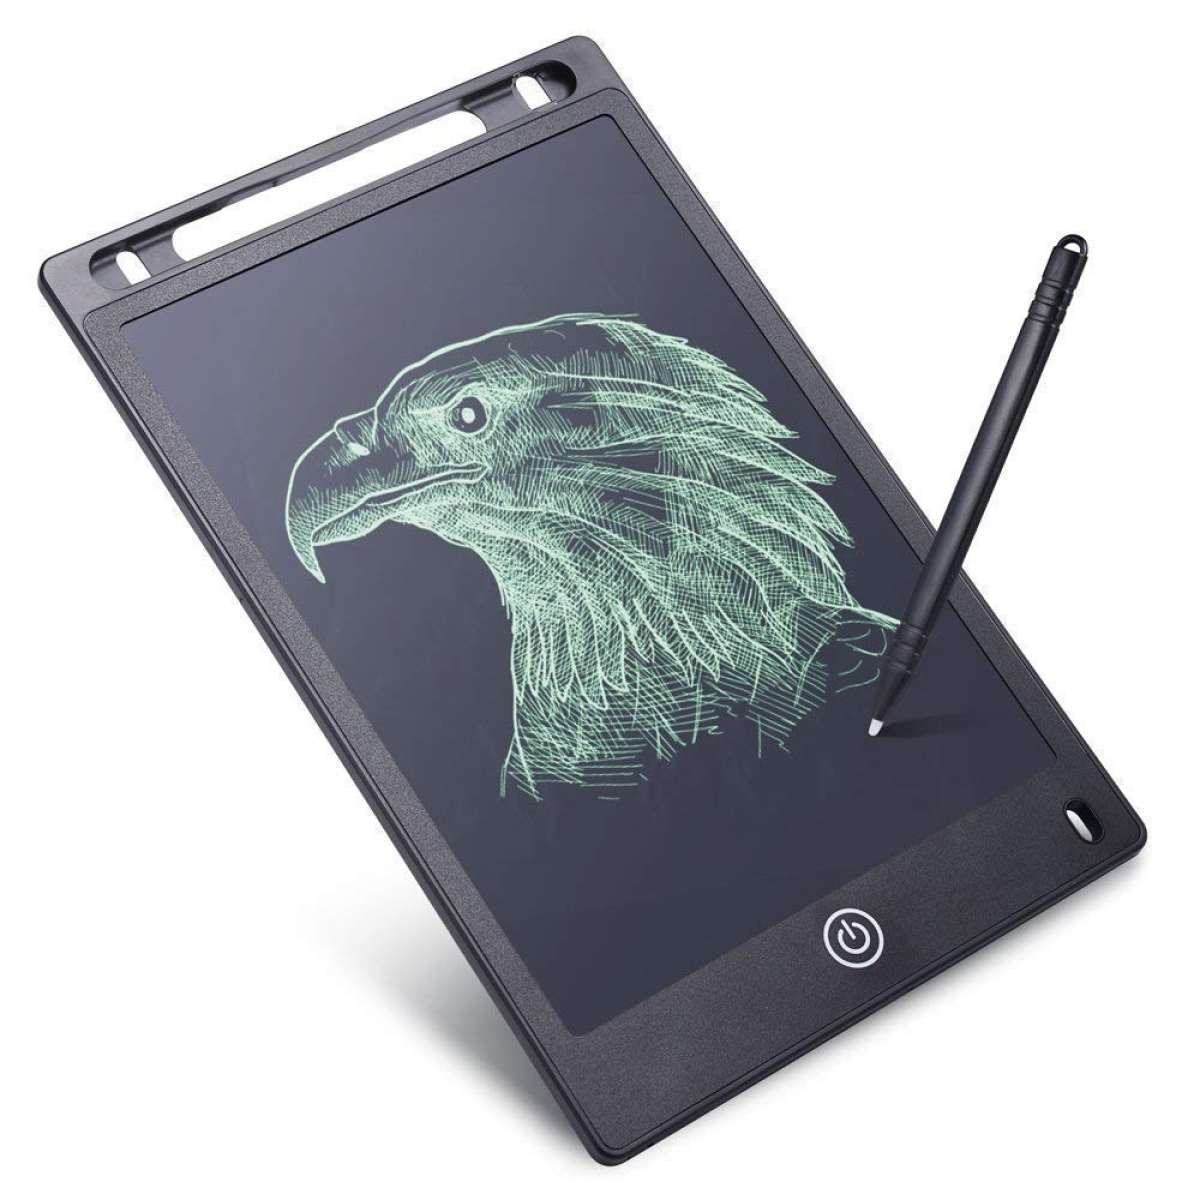 12 Inch LCD Writing Tablet-Electronic Writing Board